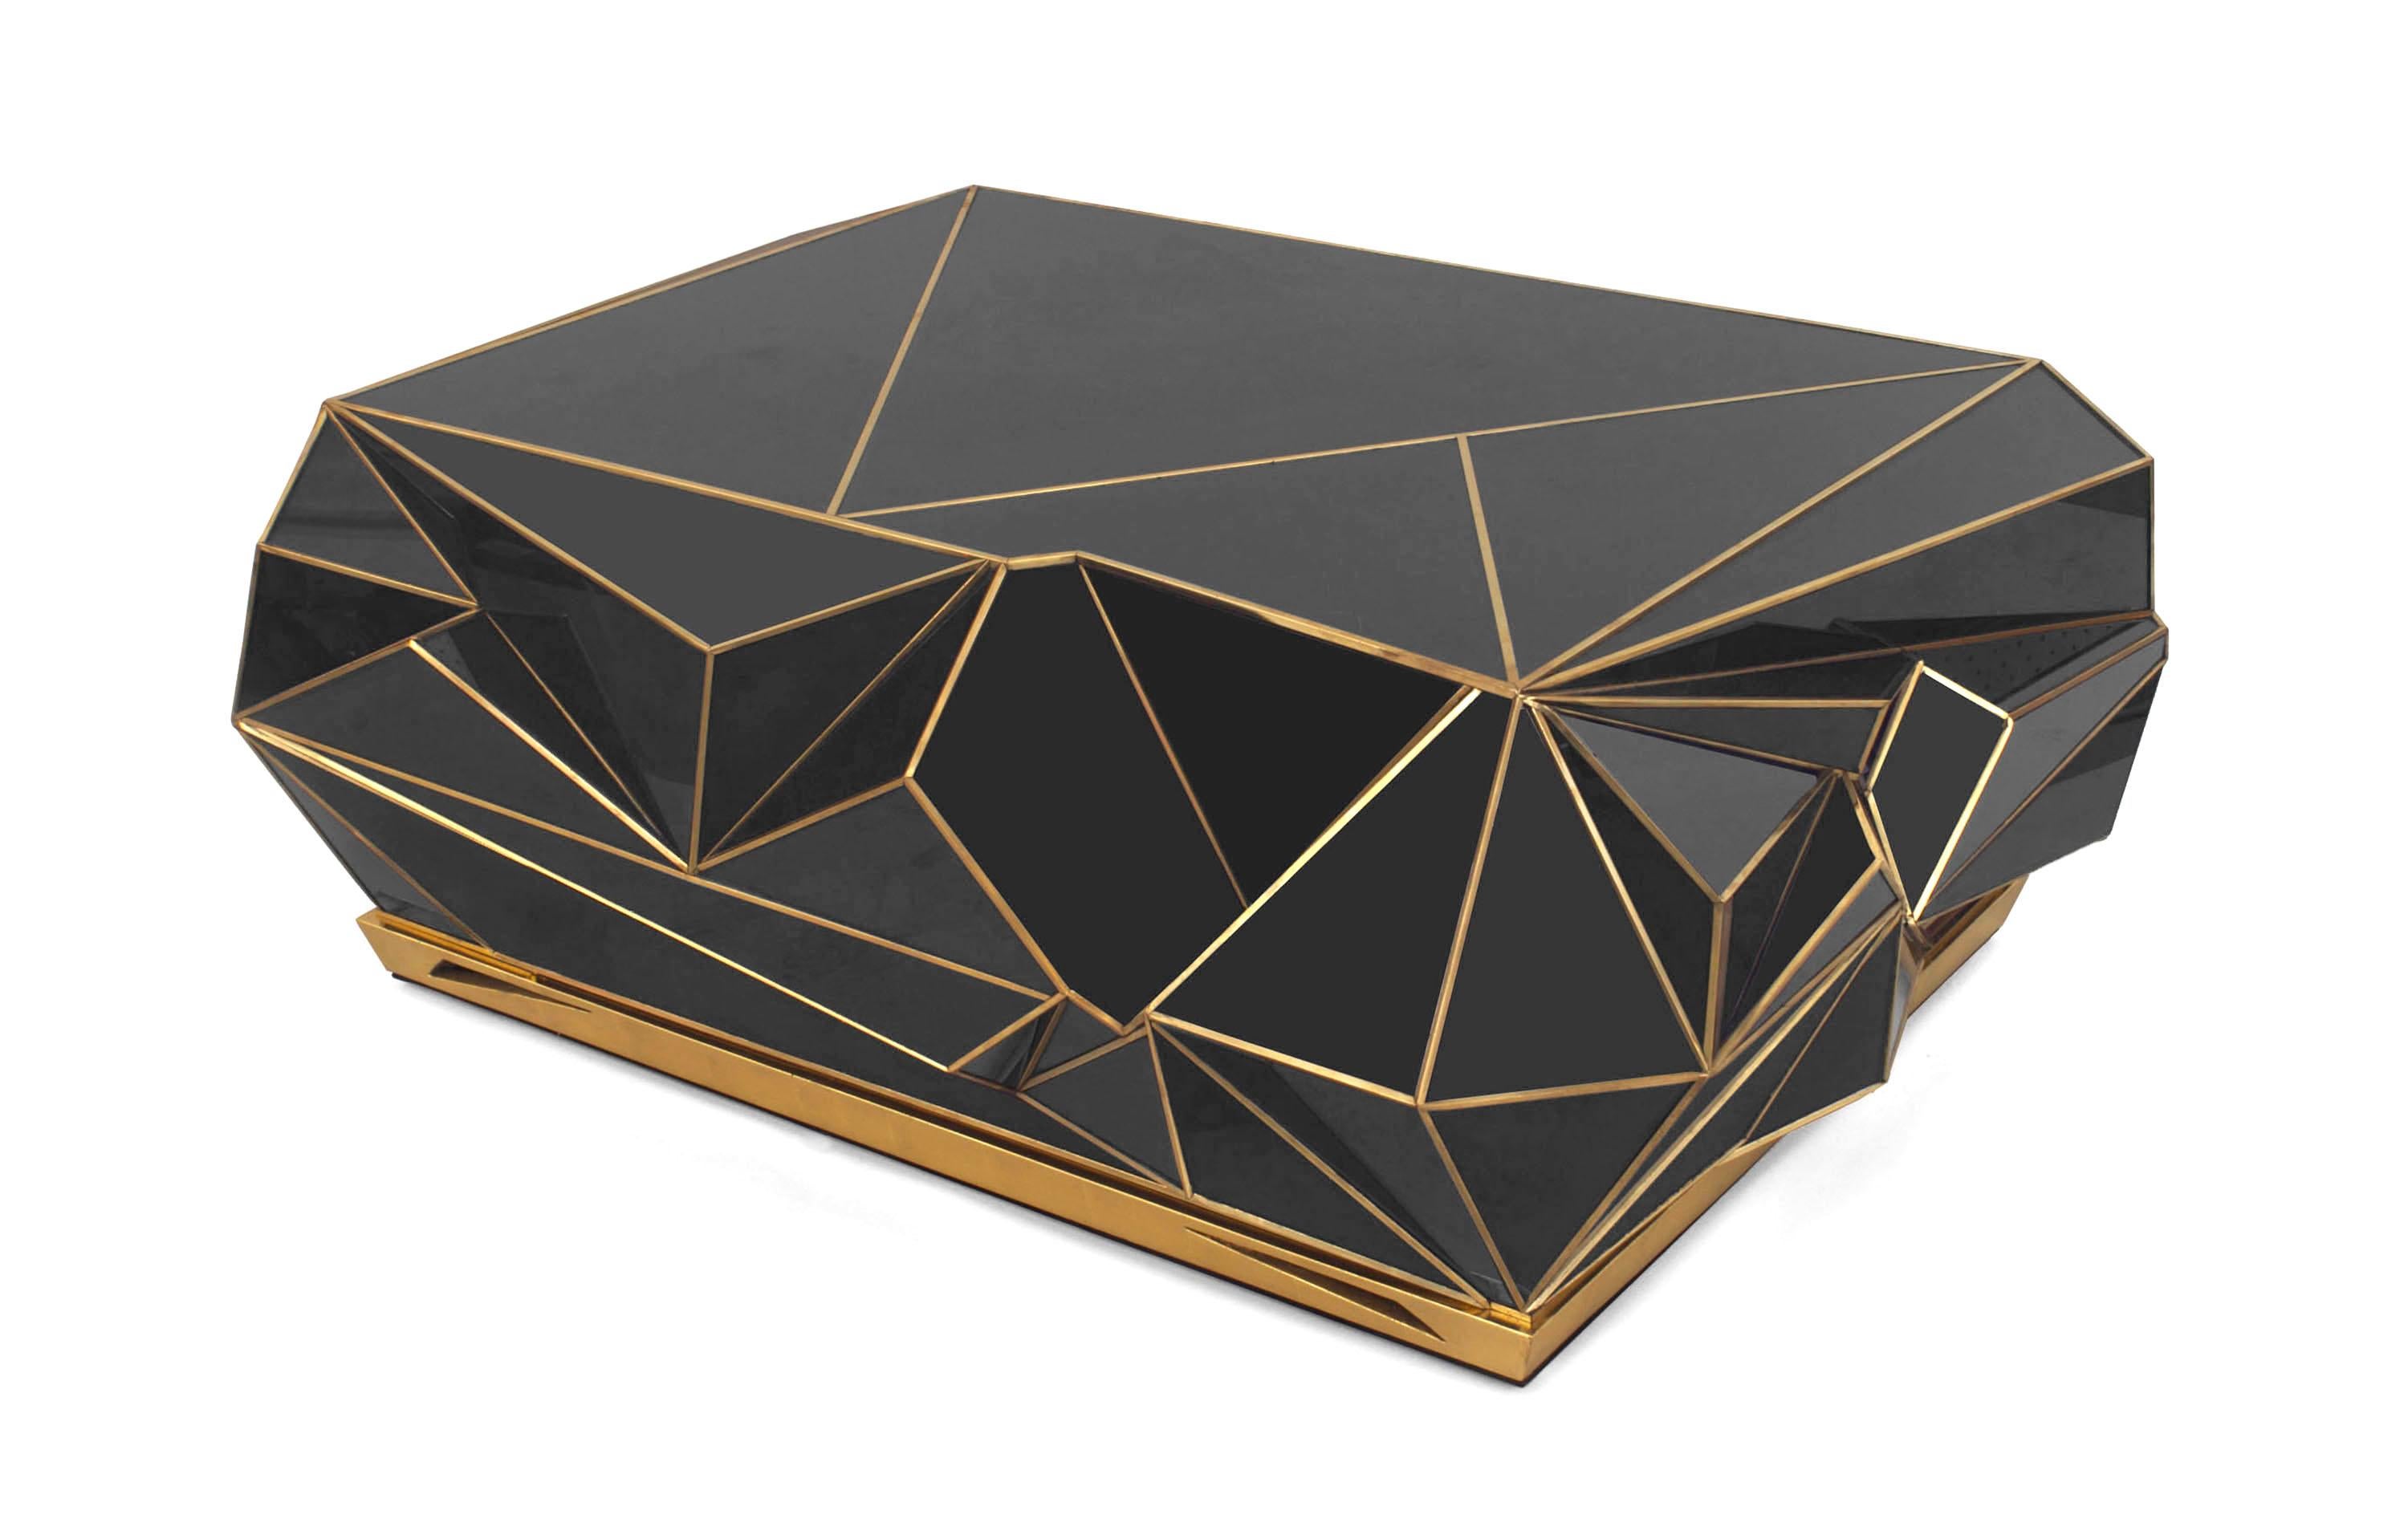 American Modern design rectangular geometric faceted form black glass coffee table with brass detailing and a giltwood base.
